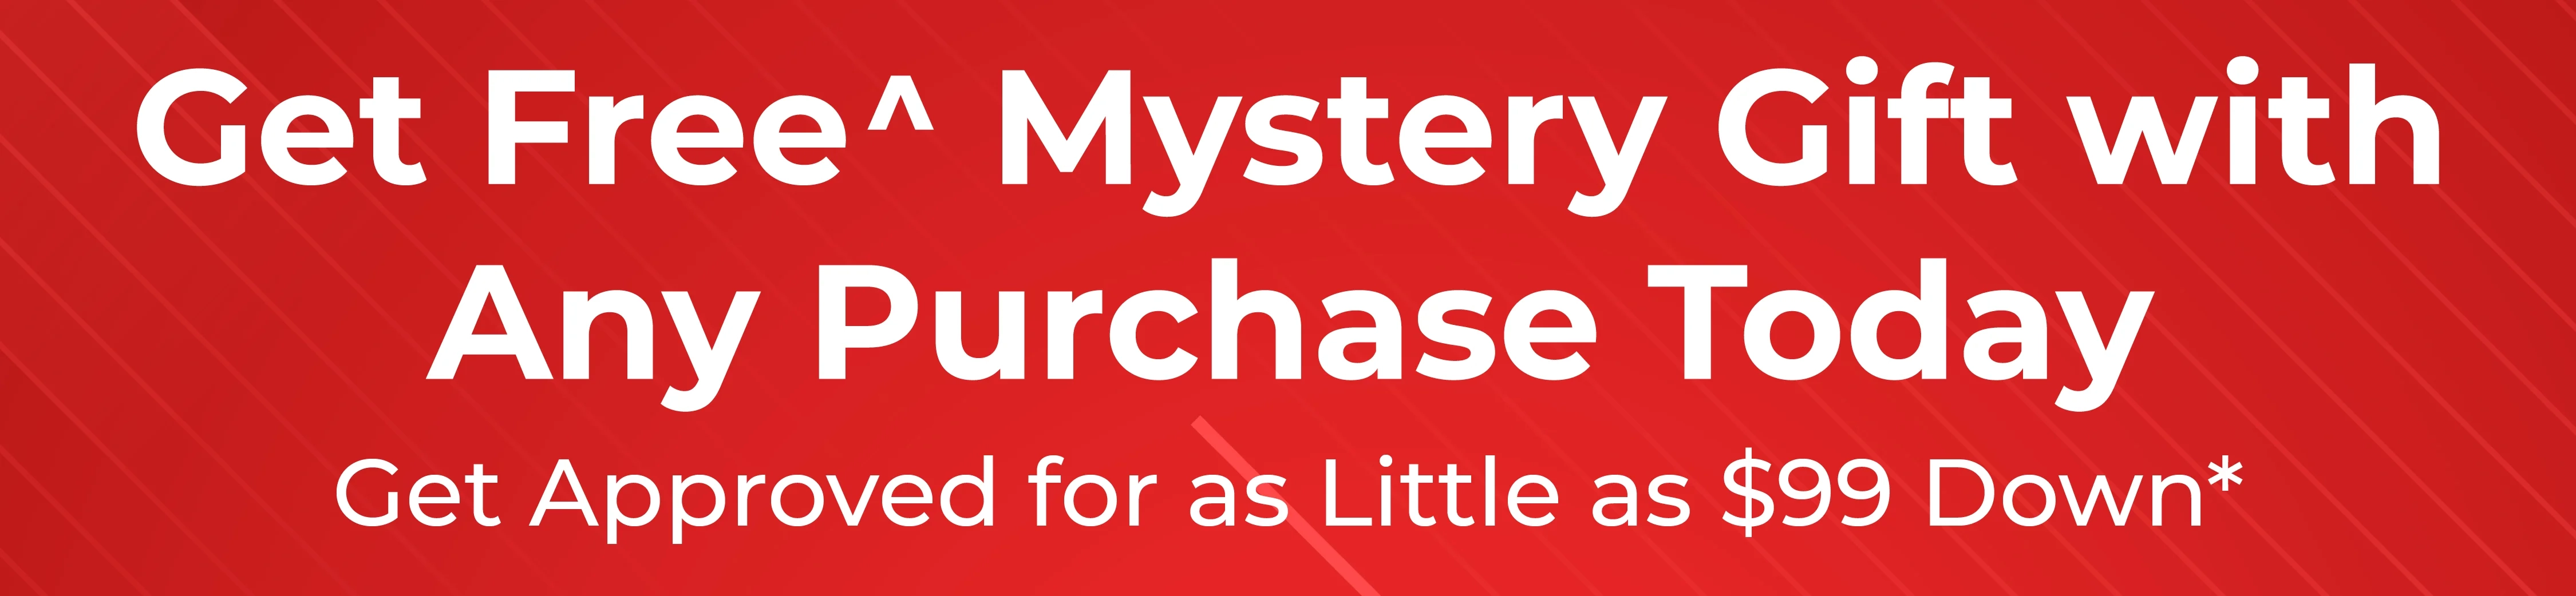 Get FREE^ Mystery Gift with Any Purchase Today. Get Approved for as Little as $99 Down*